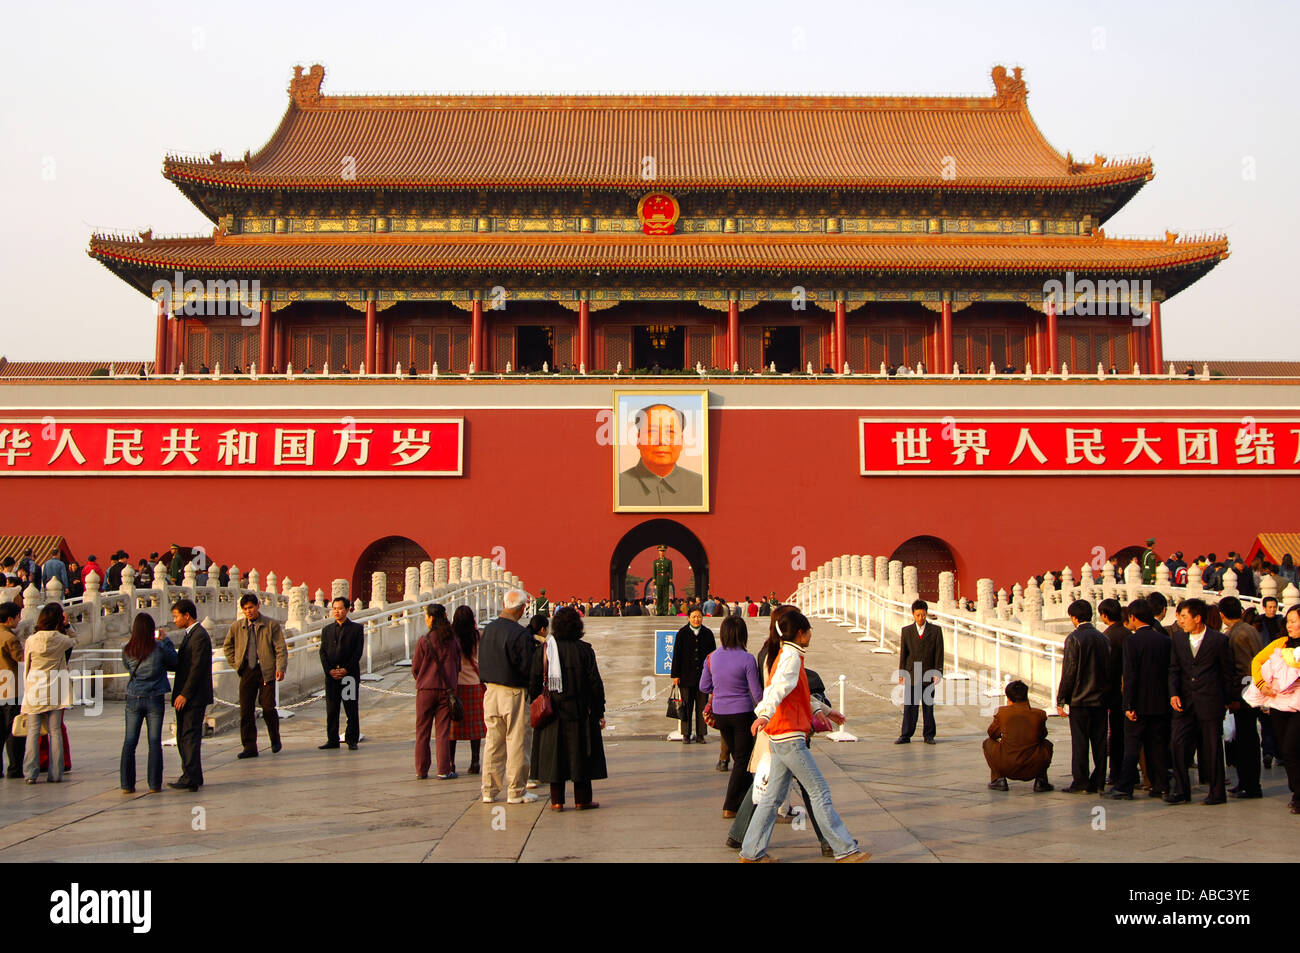 On Tiananmen square in front of the Gate of Heavenly Peace Beijing China Stock Photo